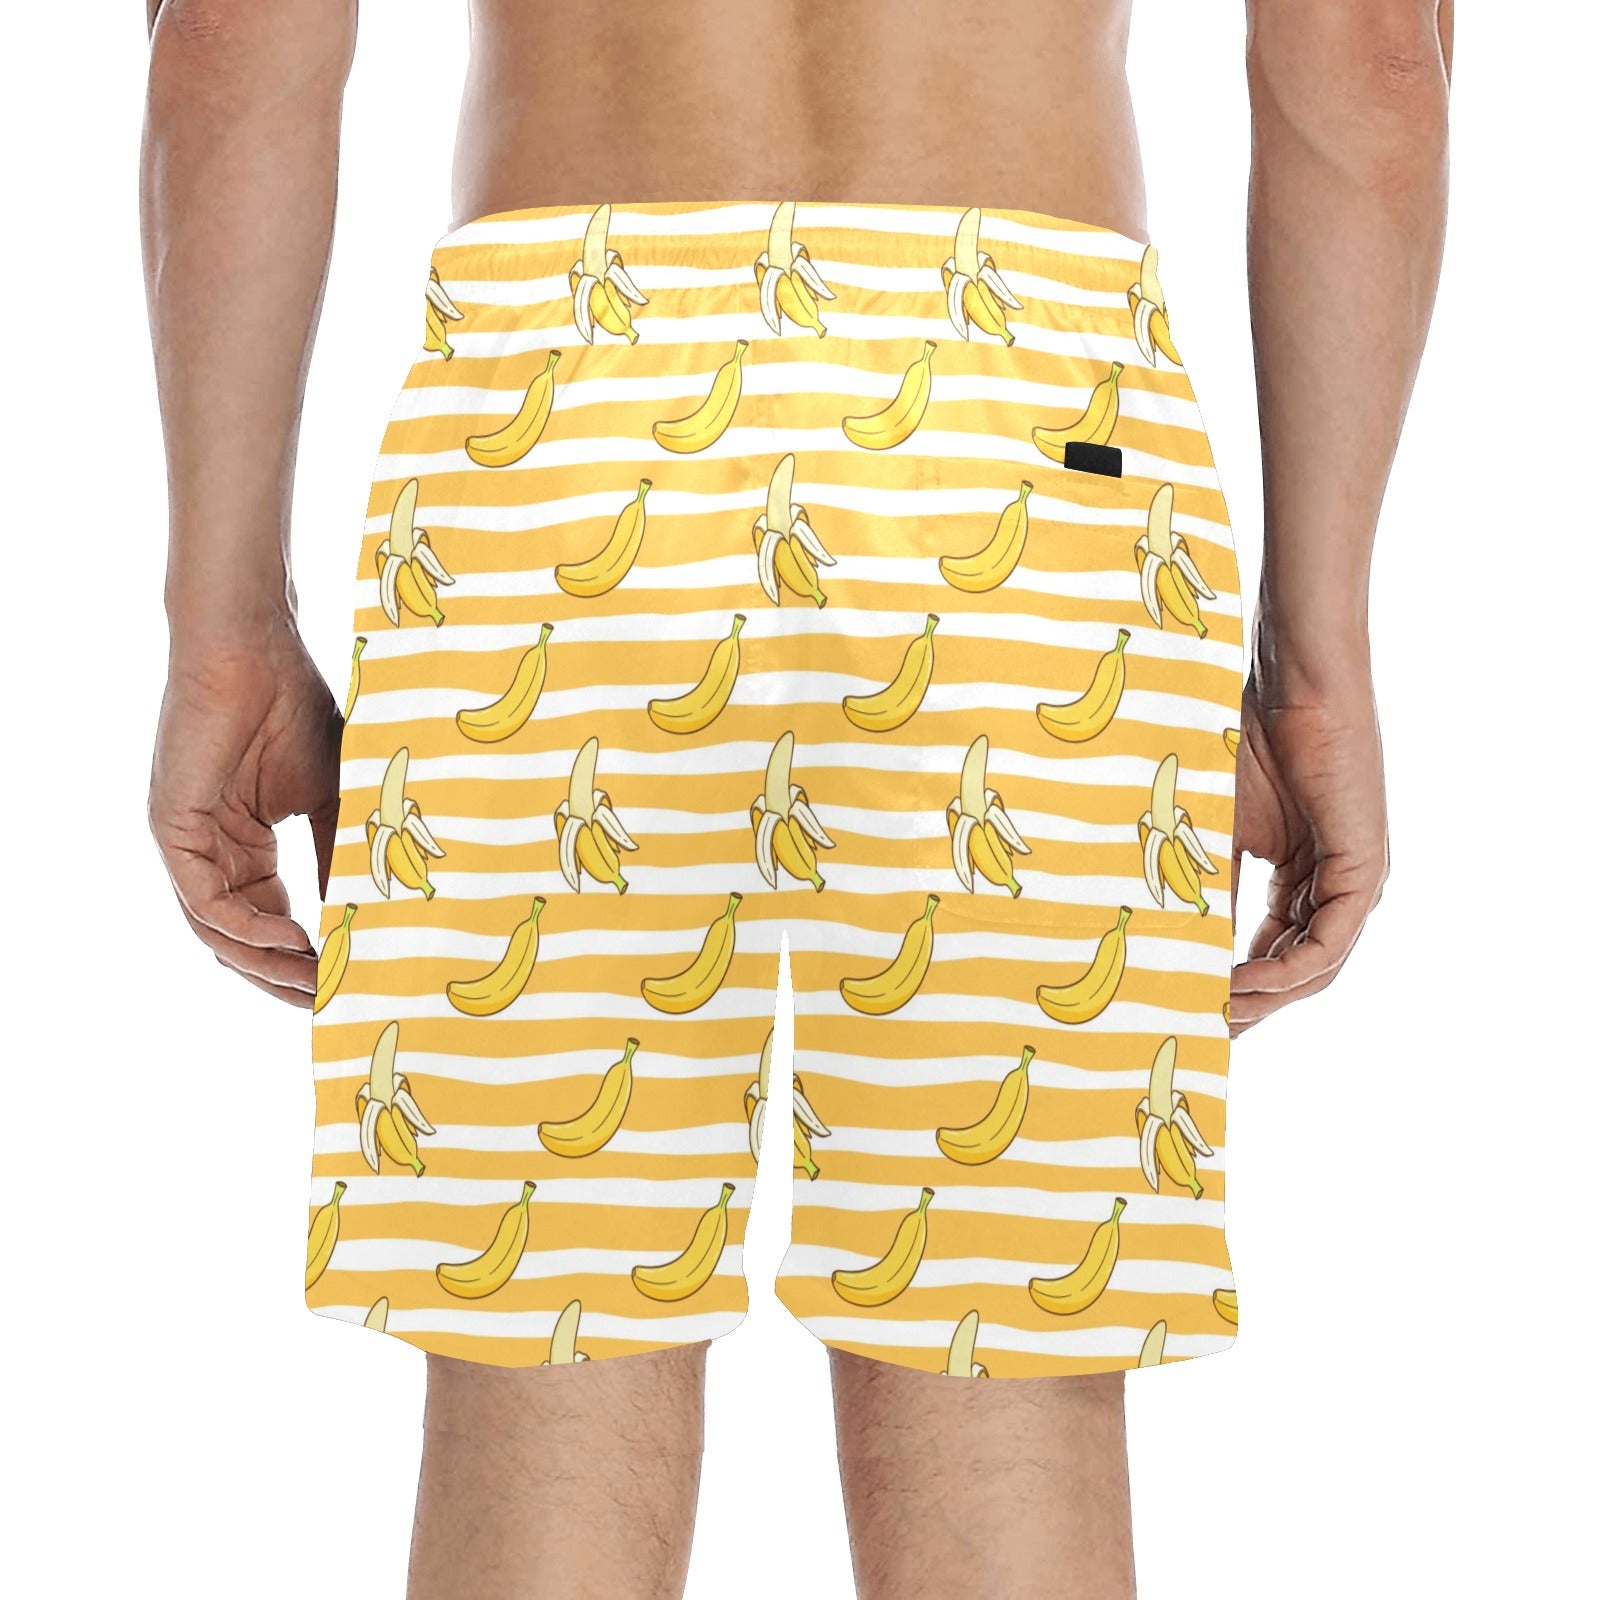 Banana Men Mid Length Shorts, Striped Yellow Funny Beach Swim Trunks Front and Back Pockets Mesh Drawstring Boys Casual Bathing Suit Summer Starcove Fashion